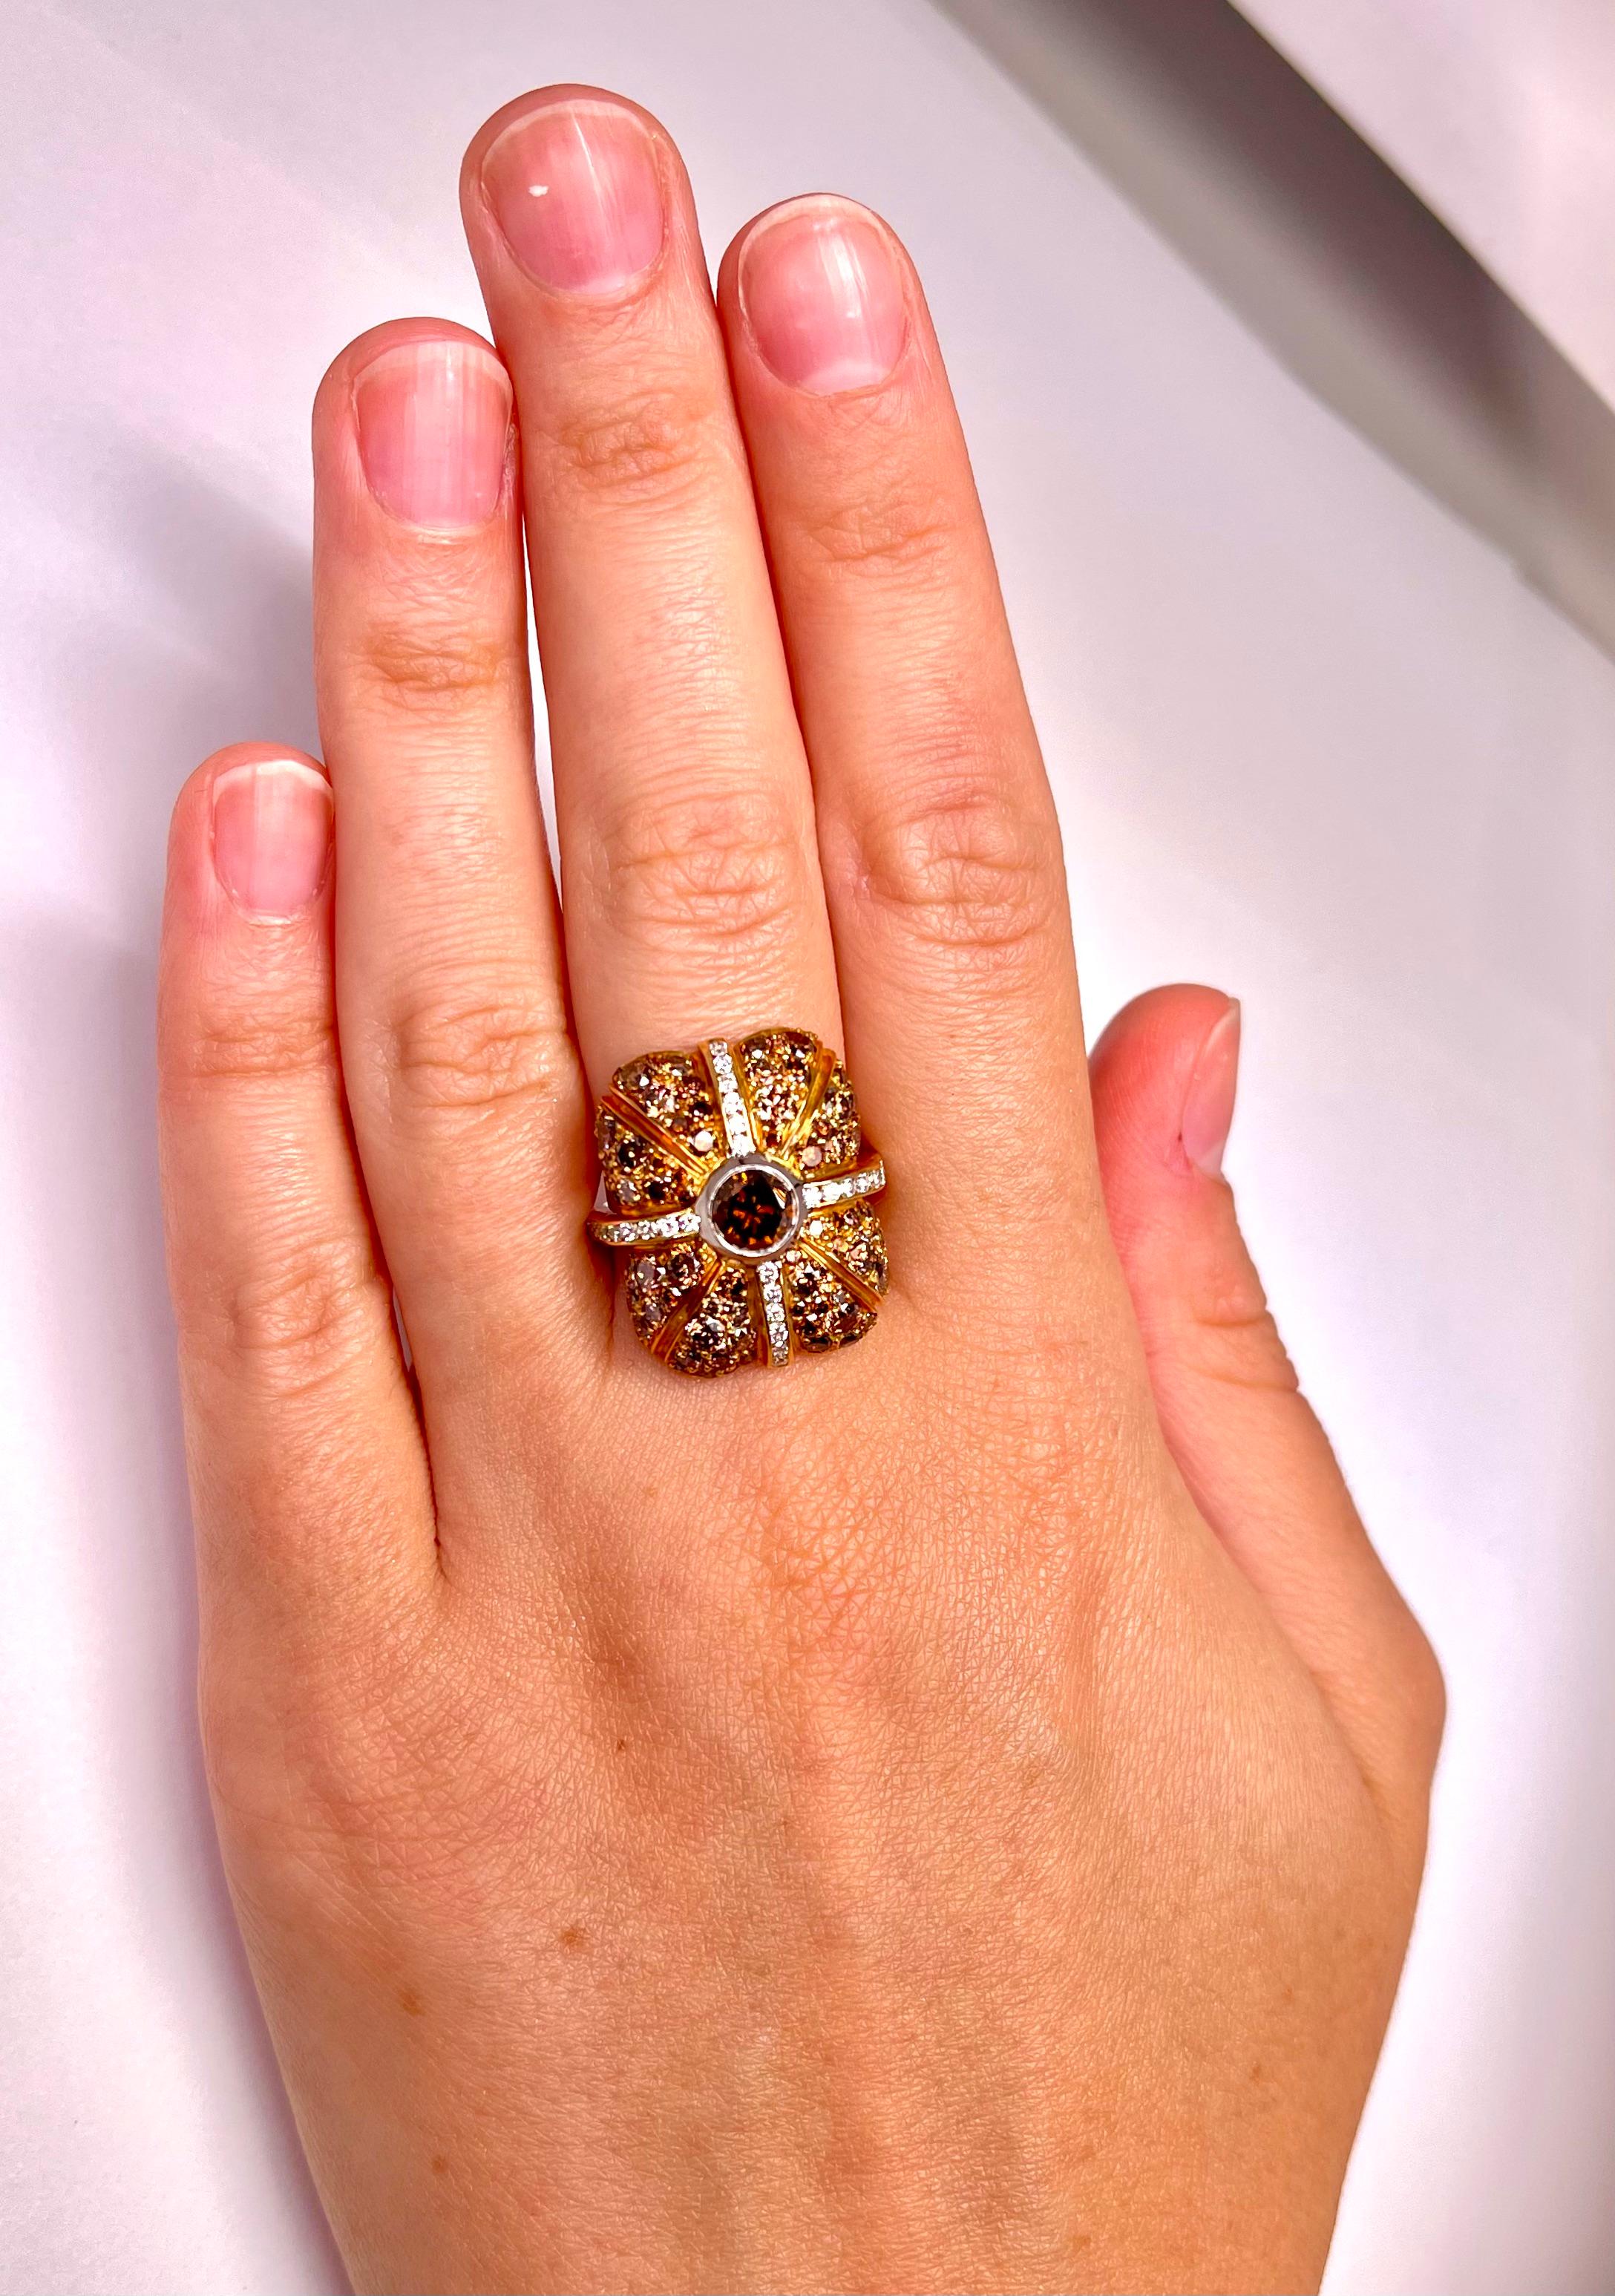 Diamond Ring with cross band of  pave set Diamonds, center stone is .70ct Orange-Brown VS2 Round cut diamond and graduating natural fancy earth tone VVS-SI1 diamonds (Brown, Orange) total of 4.10cts. Set in 18K Yellow gold. Finger size: 6.5.